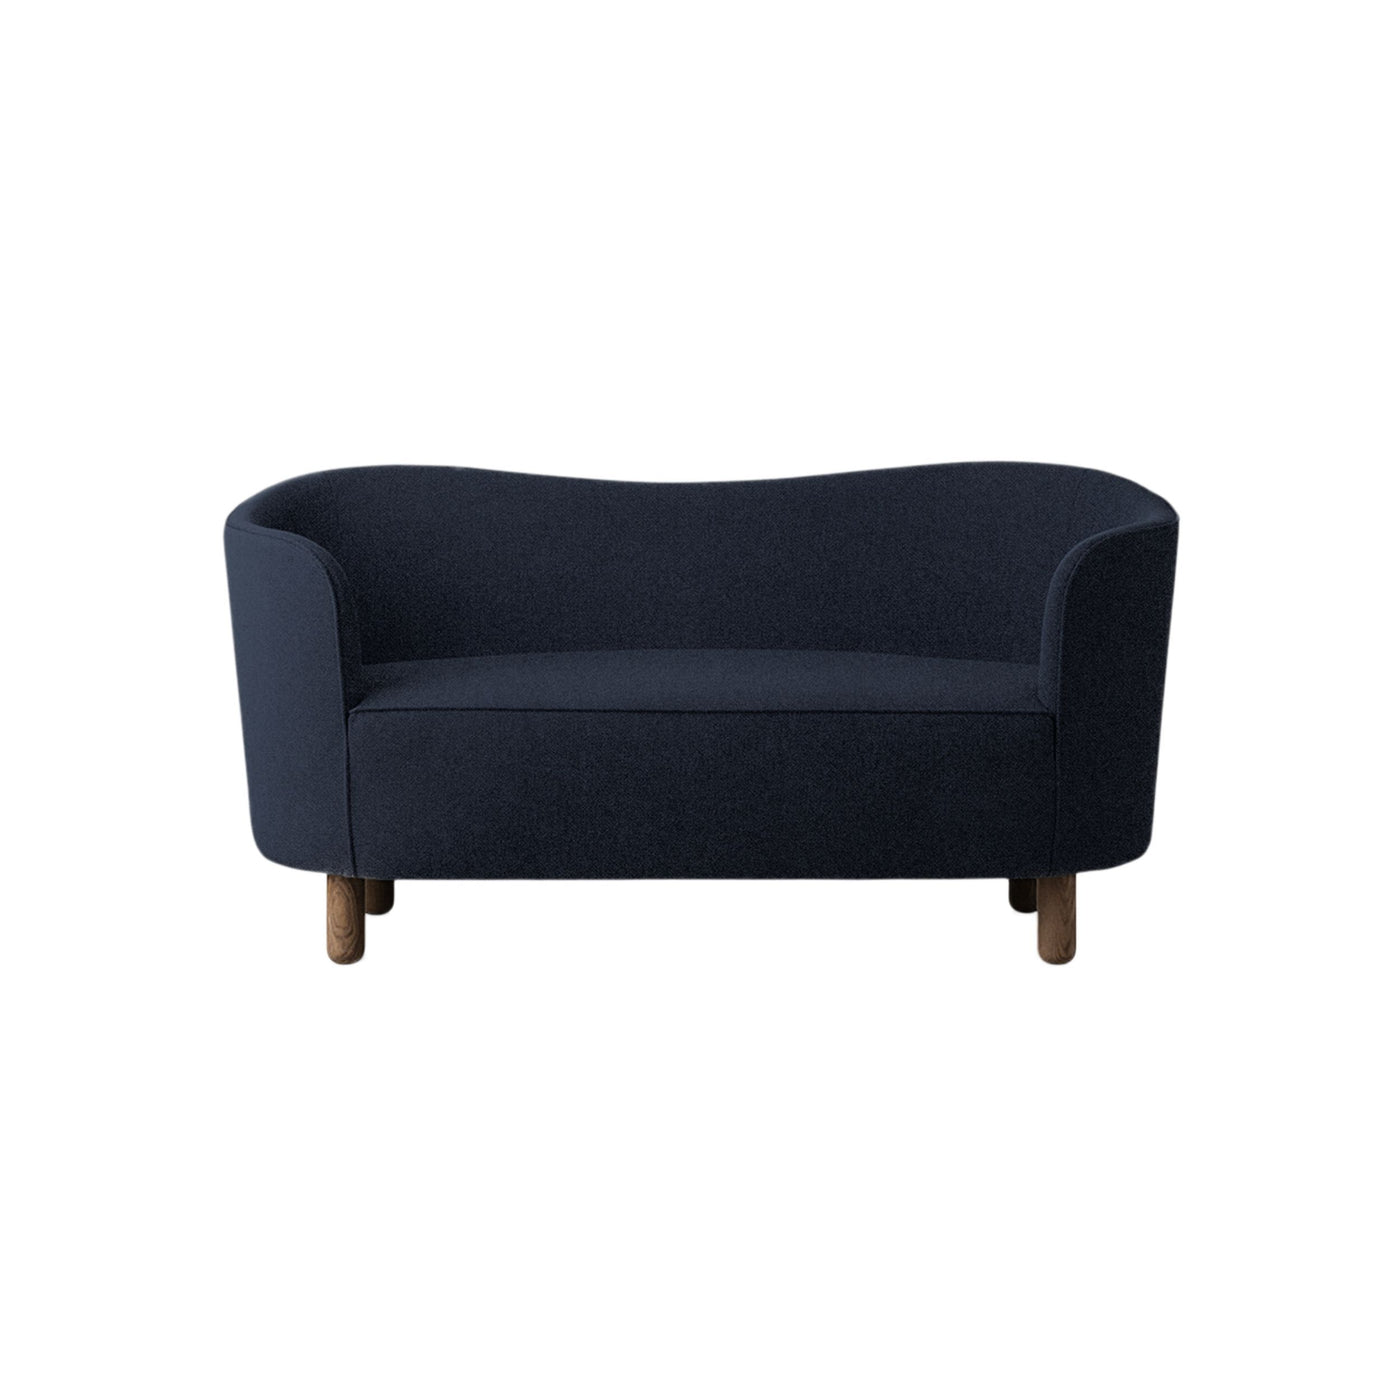 By Lassen Mingle sofa with smoked oak legs. Made to order from someday designs. #colour_sahco-zero-6